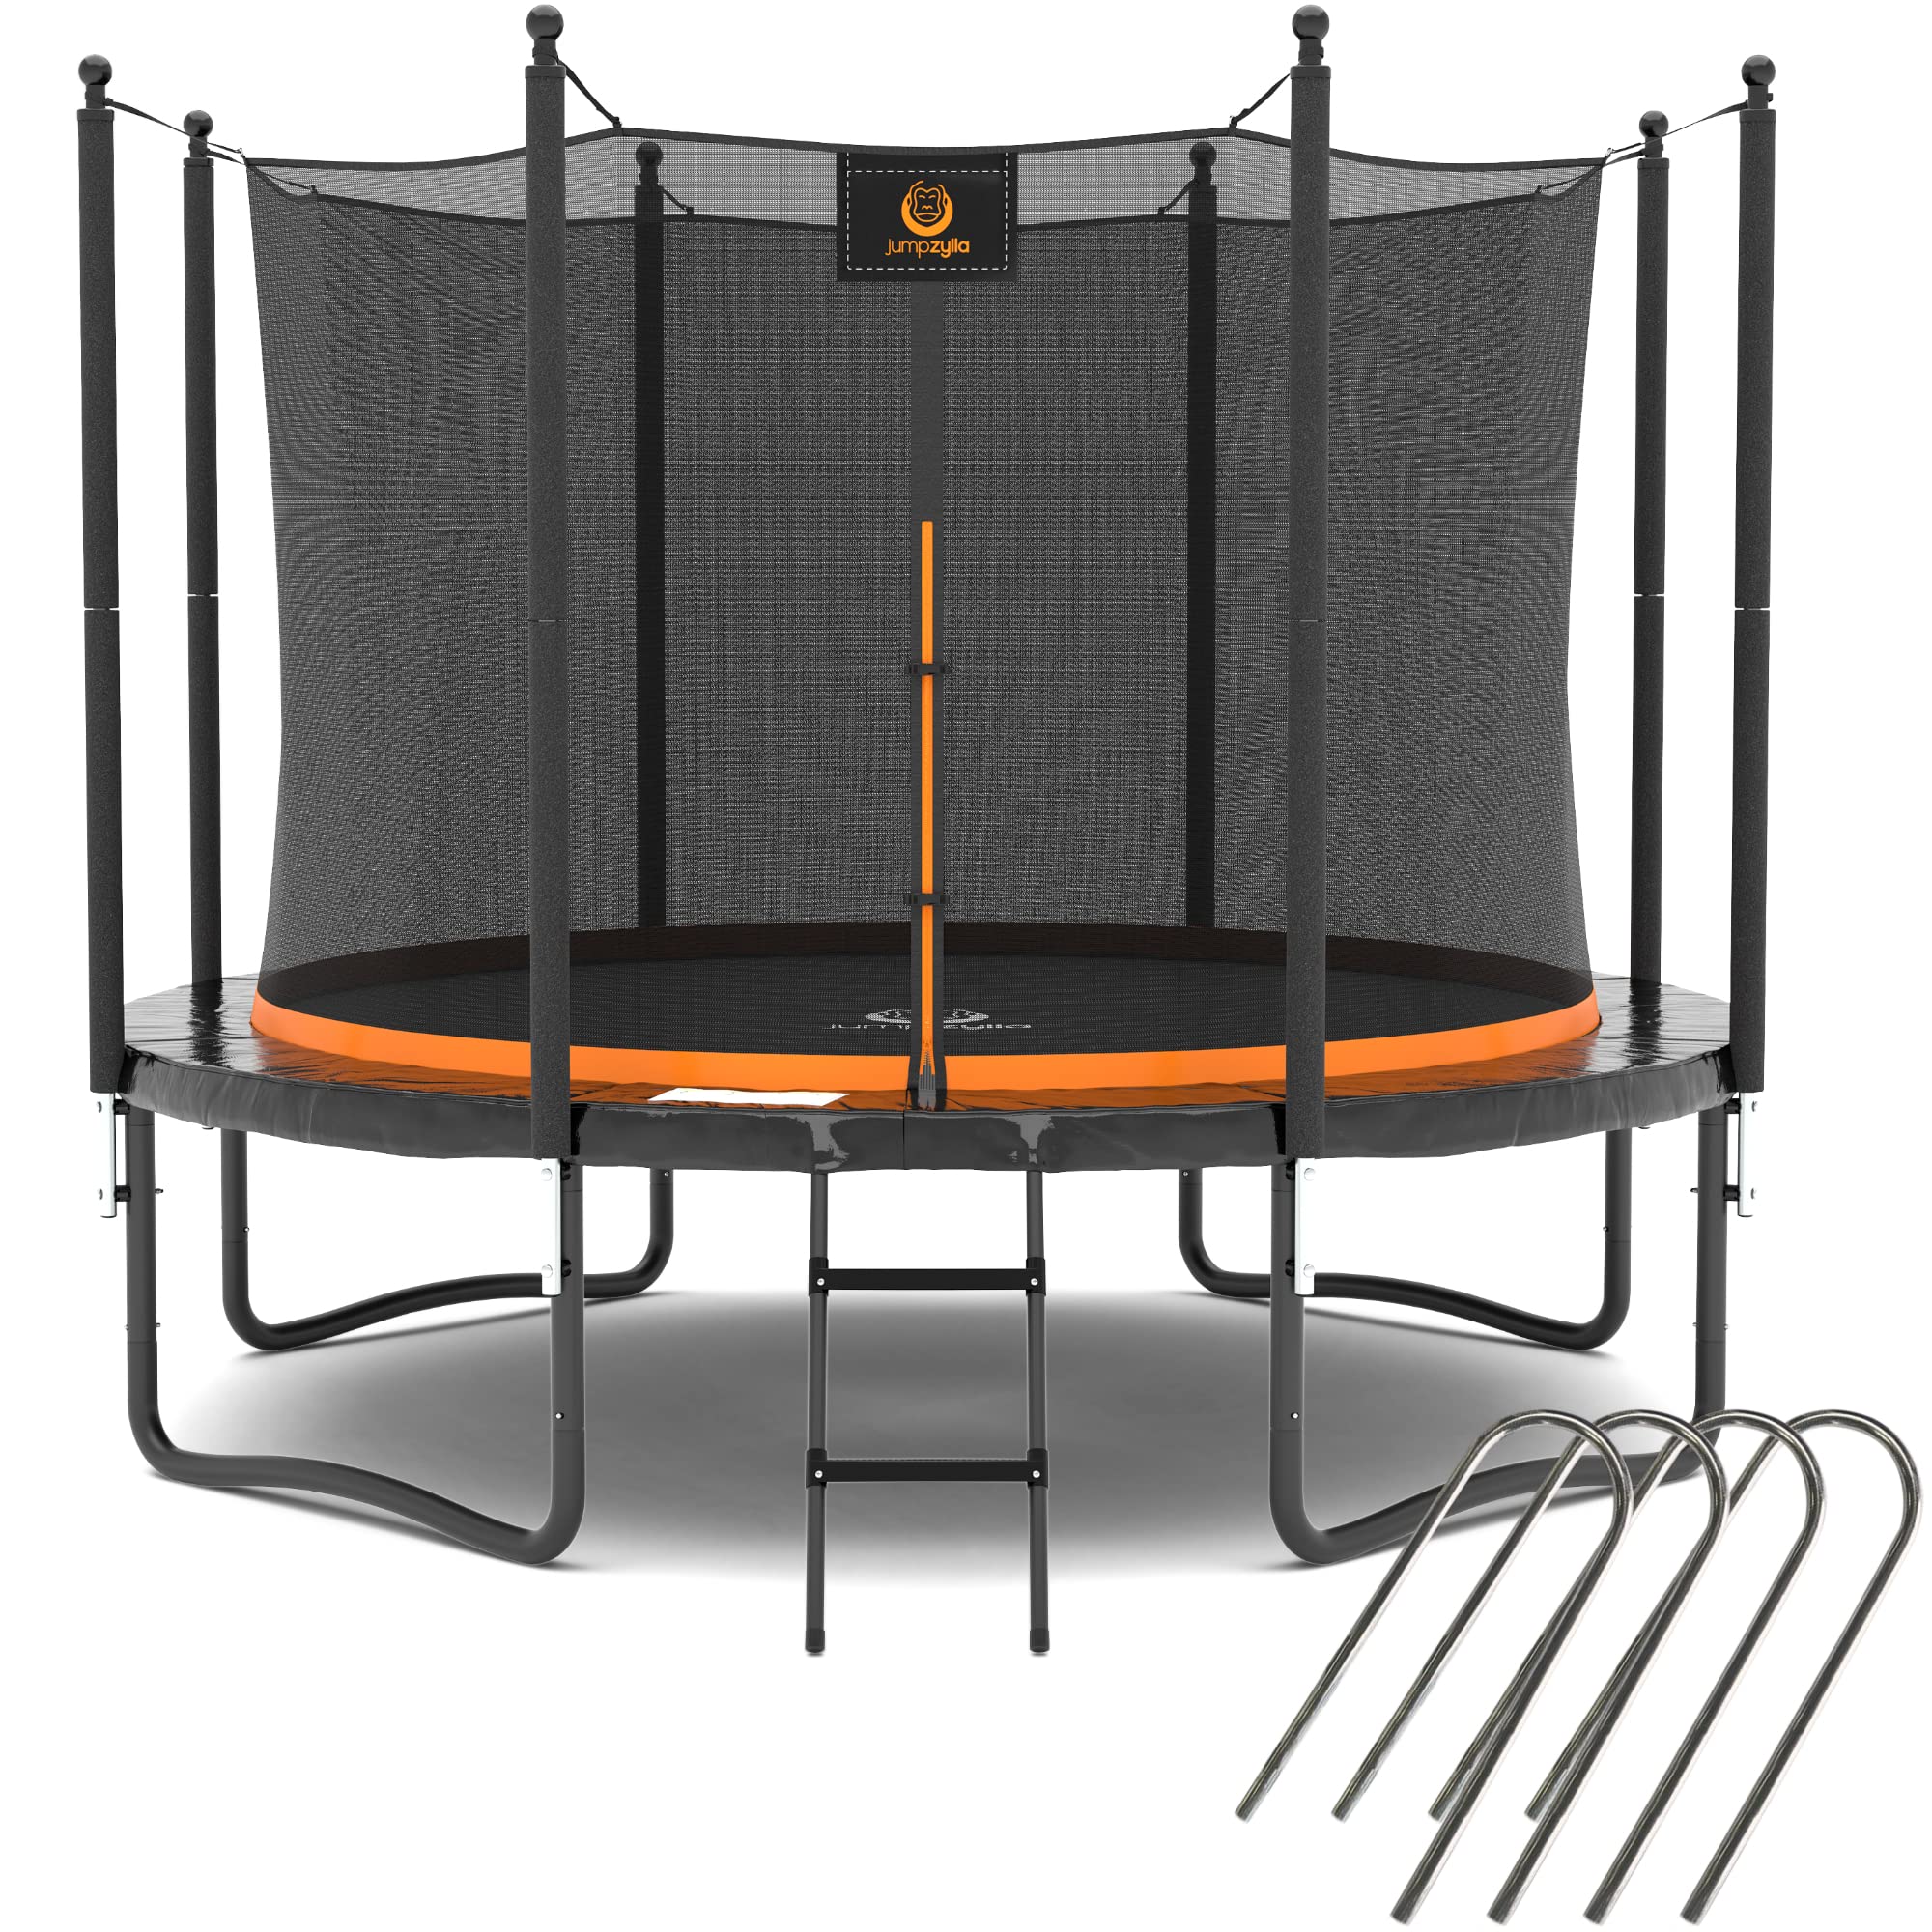 JUMPZYLLA Trampoline for Kids and Adults 10 FT 12 FT 14 FT - Recreational Outdoor Trampoline with Net - Straight Pole Fun Exerci